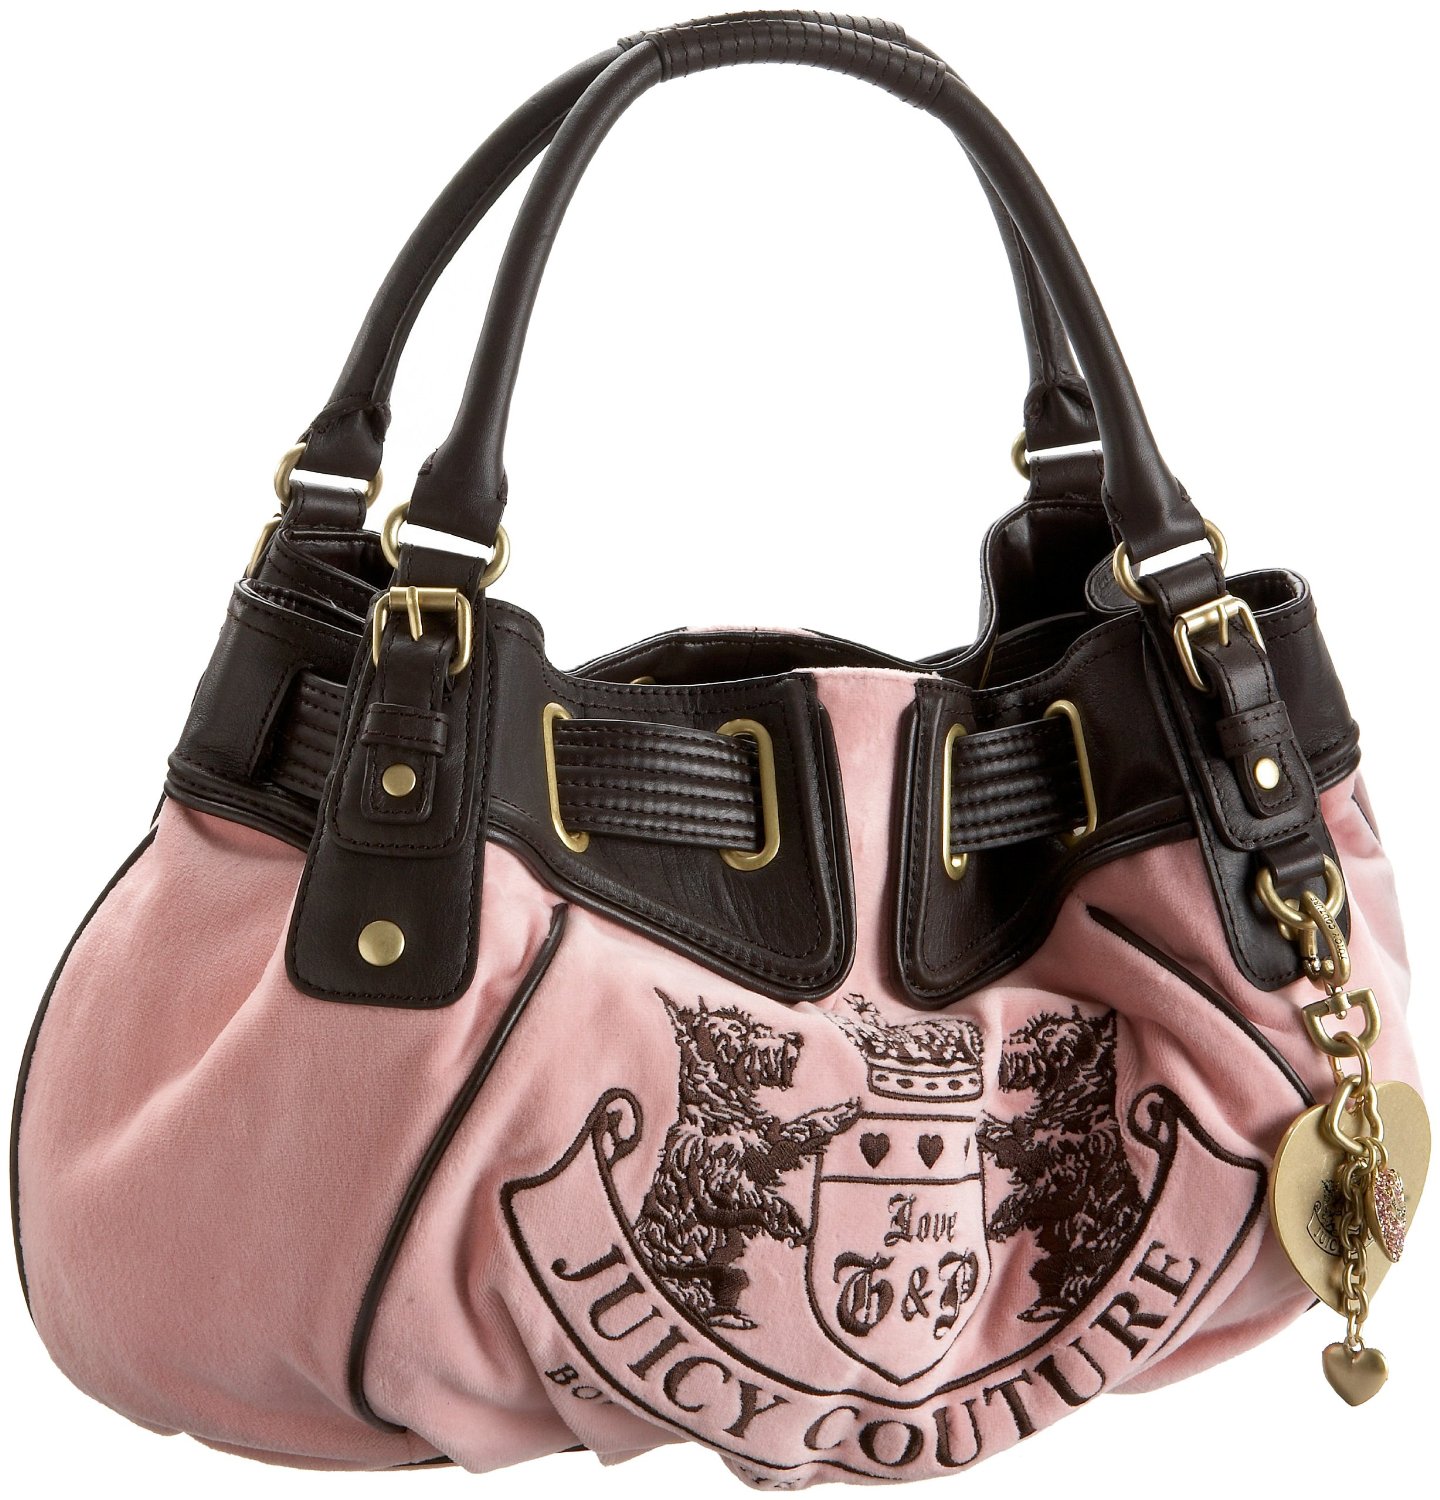 Juicy Couture Ongoing Velour Crest Freestyle Satchel  $188.81